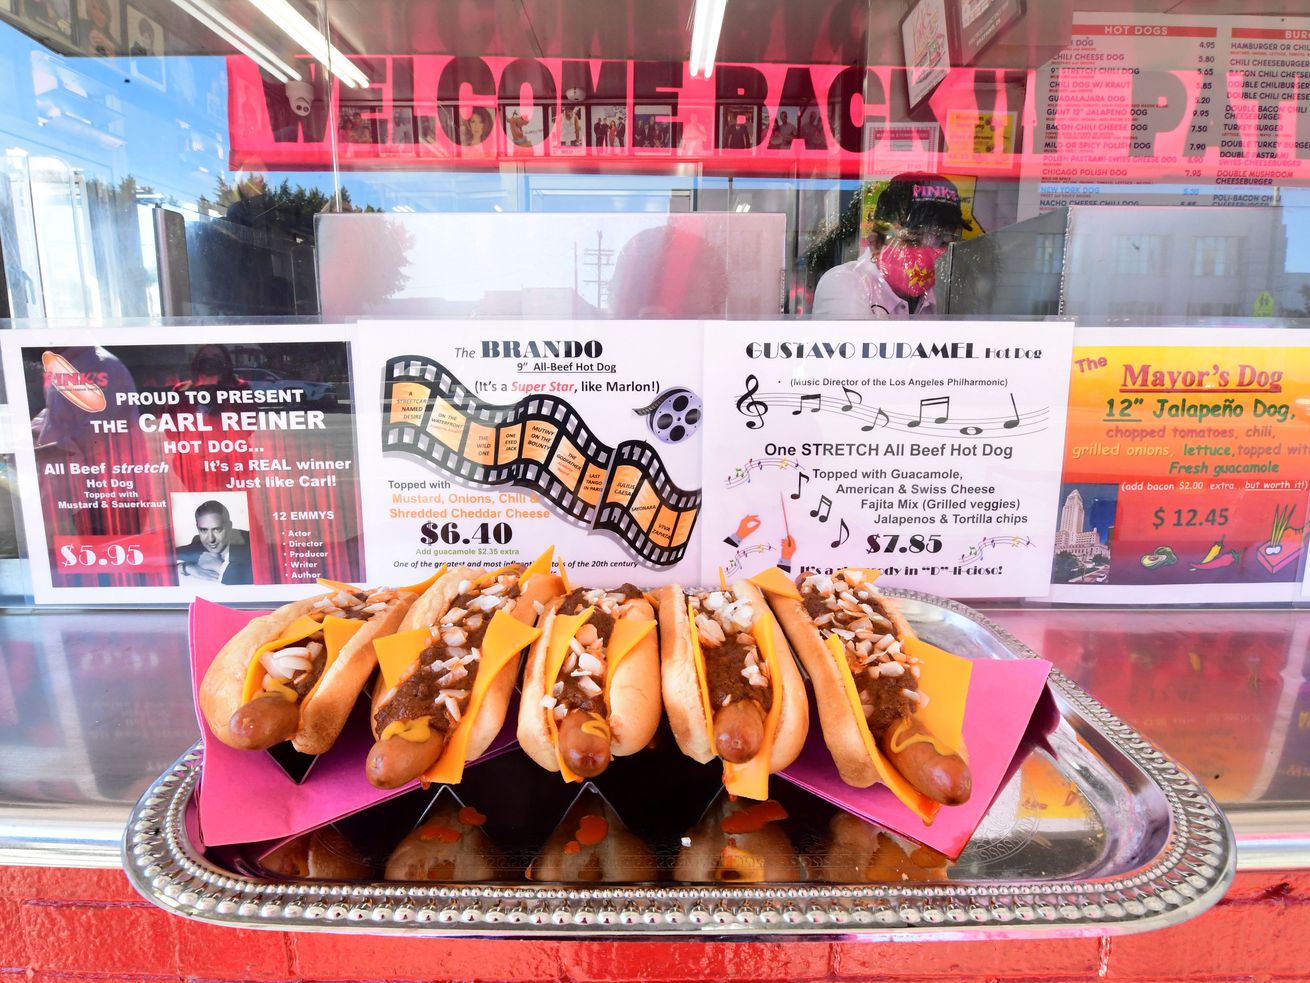 A tray of hotdogs in buns on the counter at Pink’s Hot Dogs in Los Angeles.